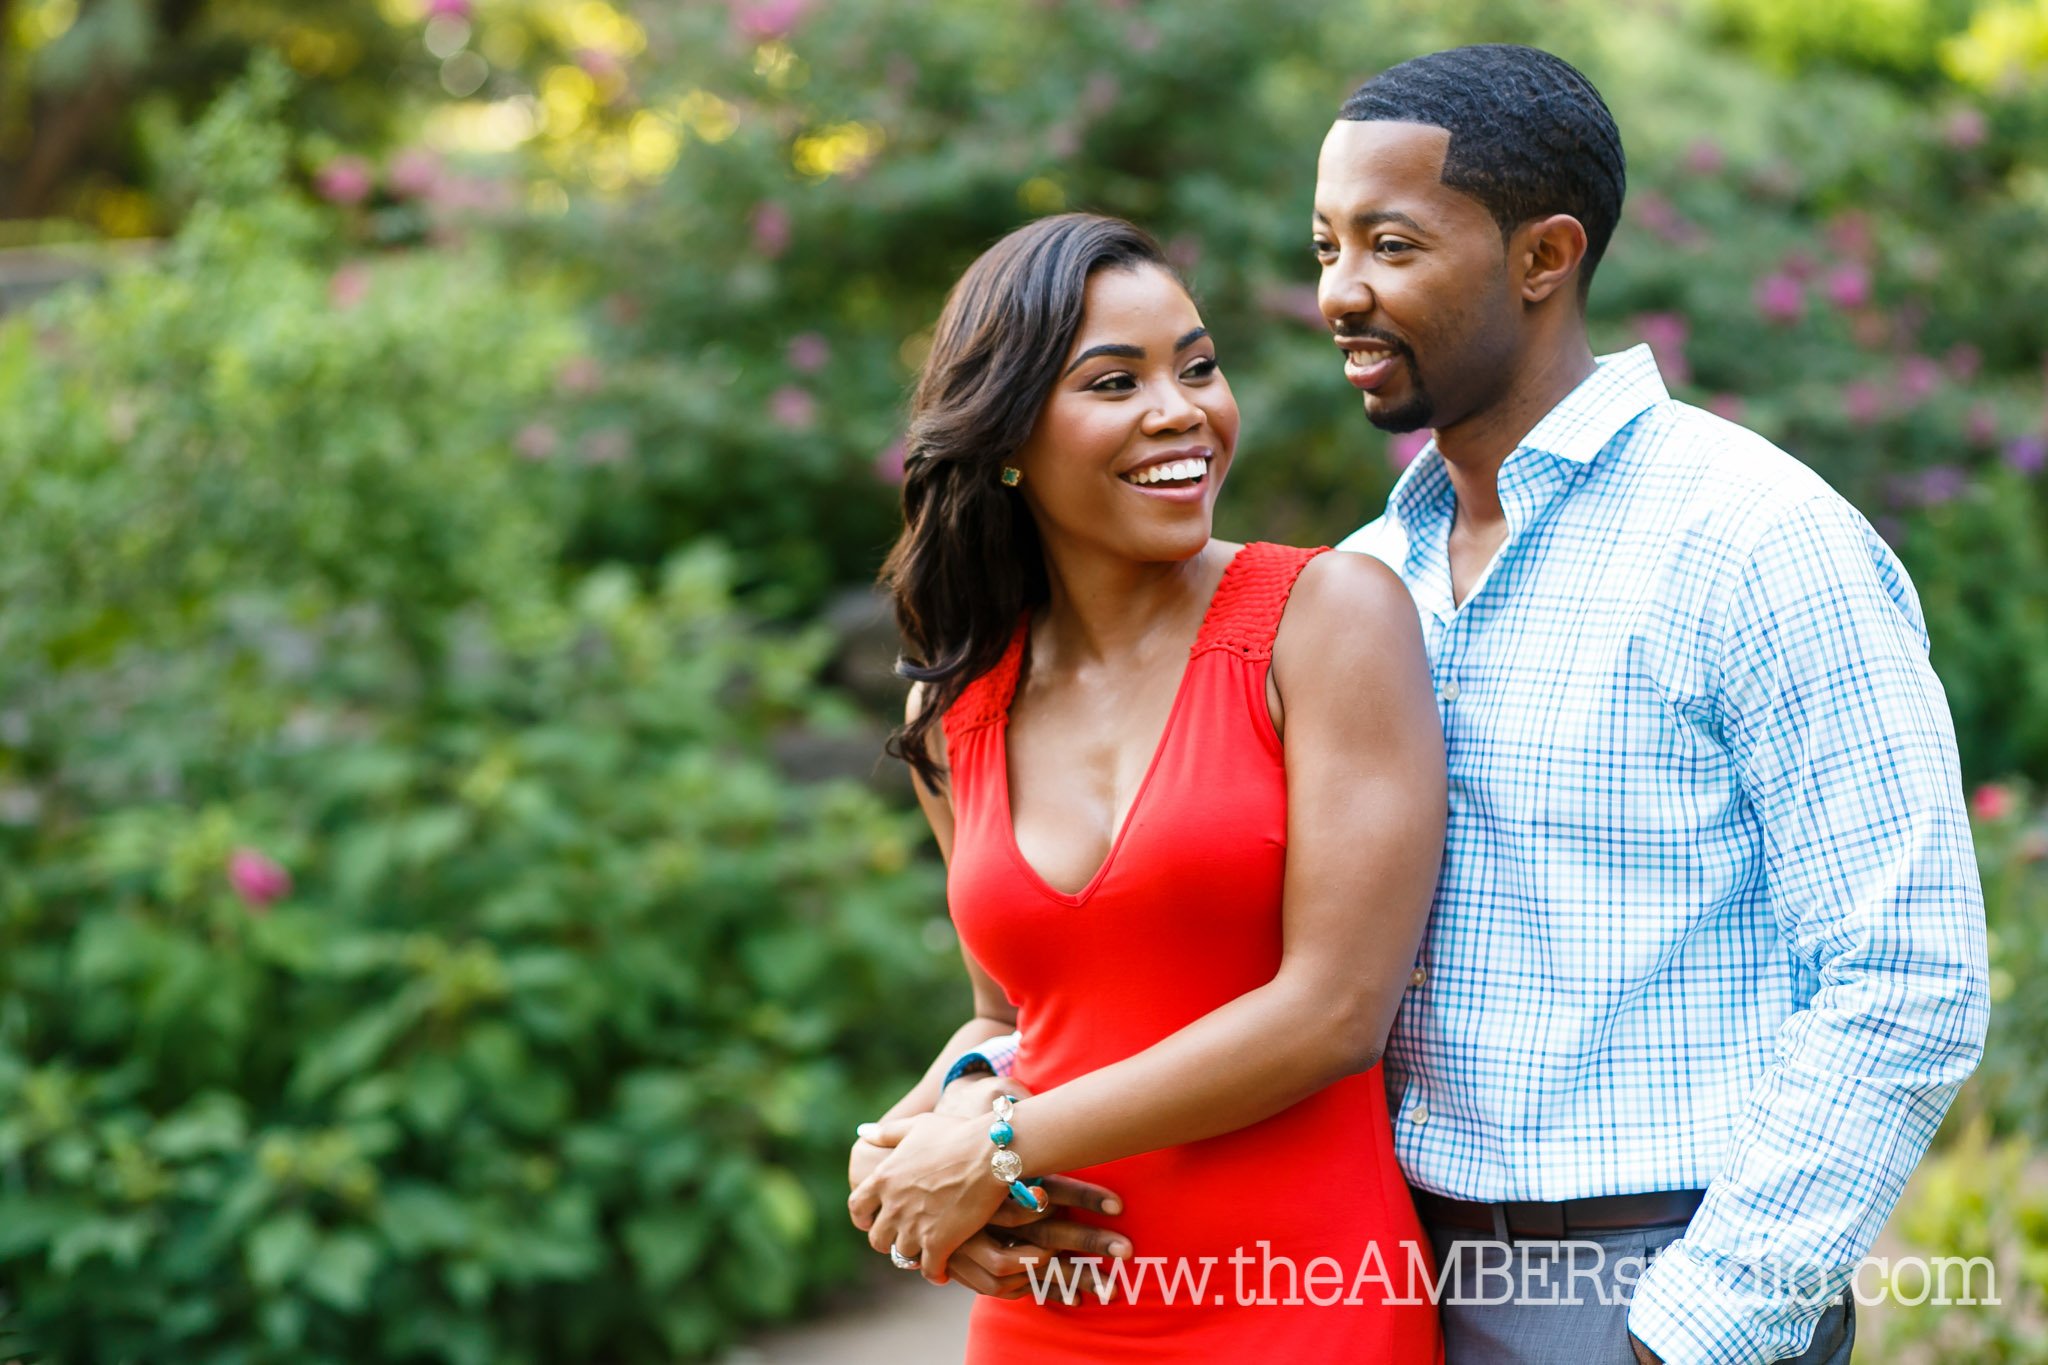 black-wedding-photographer-dallas-texas-engagement-photos-amber-knowles-studio-fort-worth-botanical-gardens-red-dress-suit-african-american-couple-cc0005